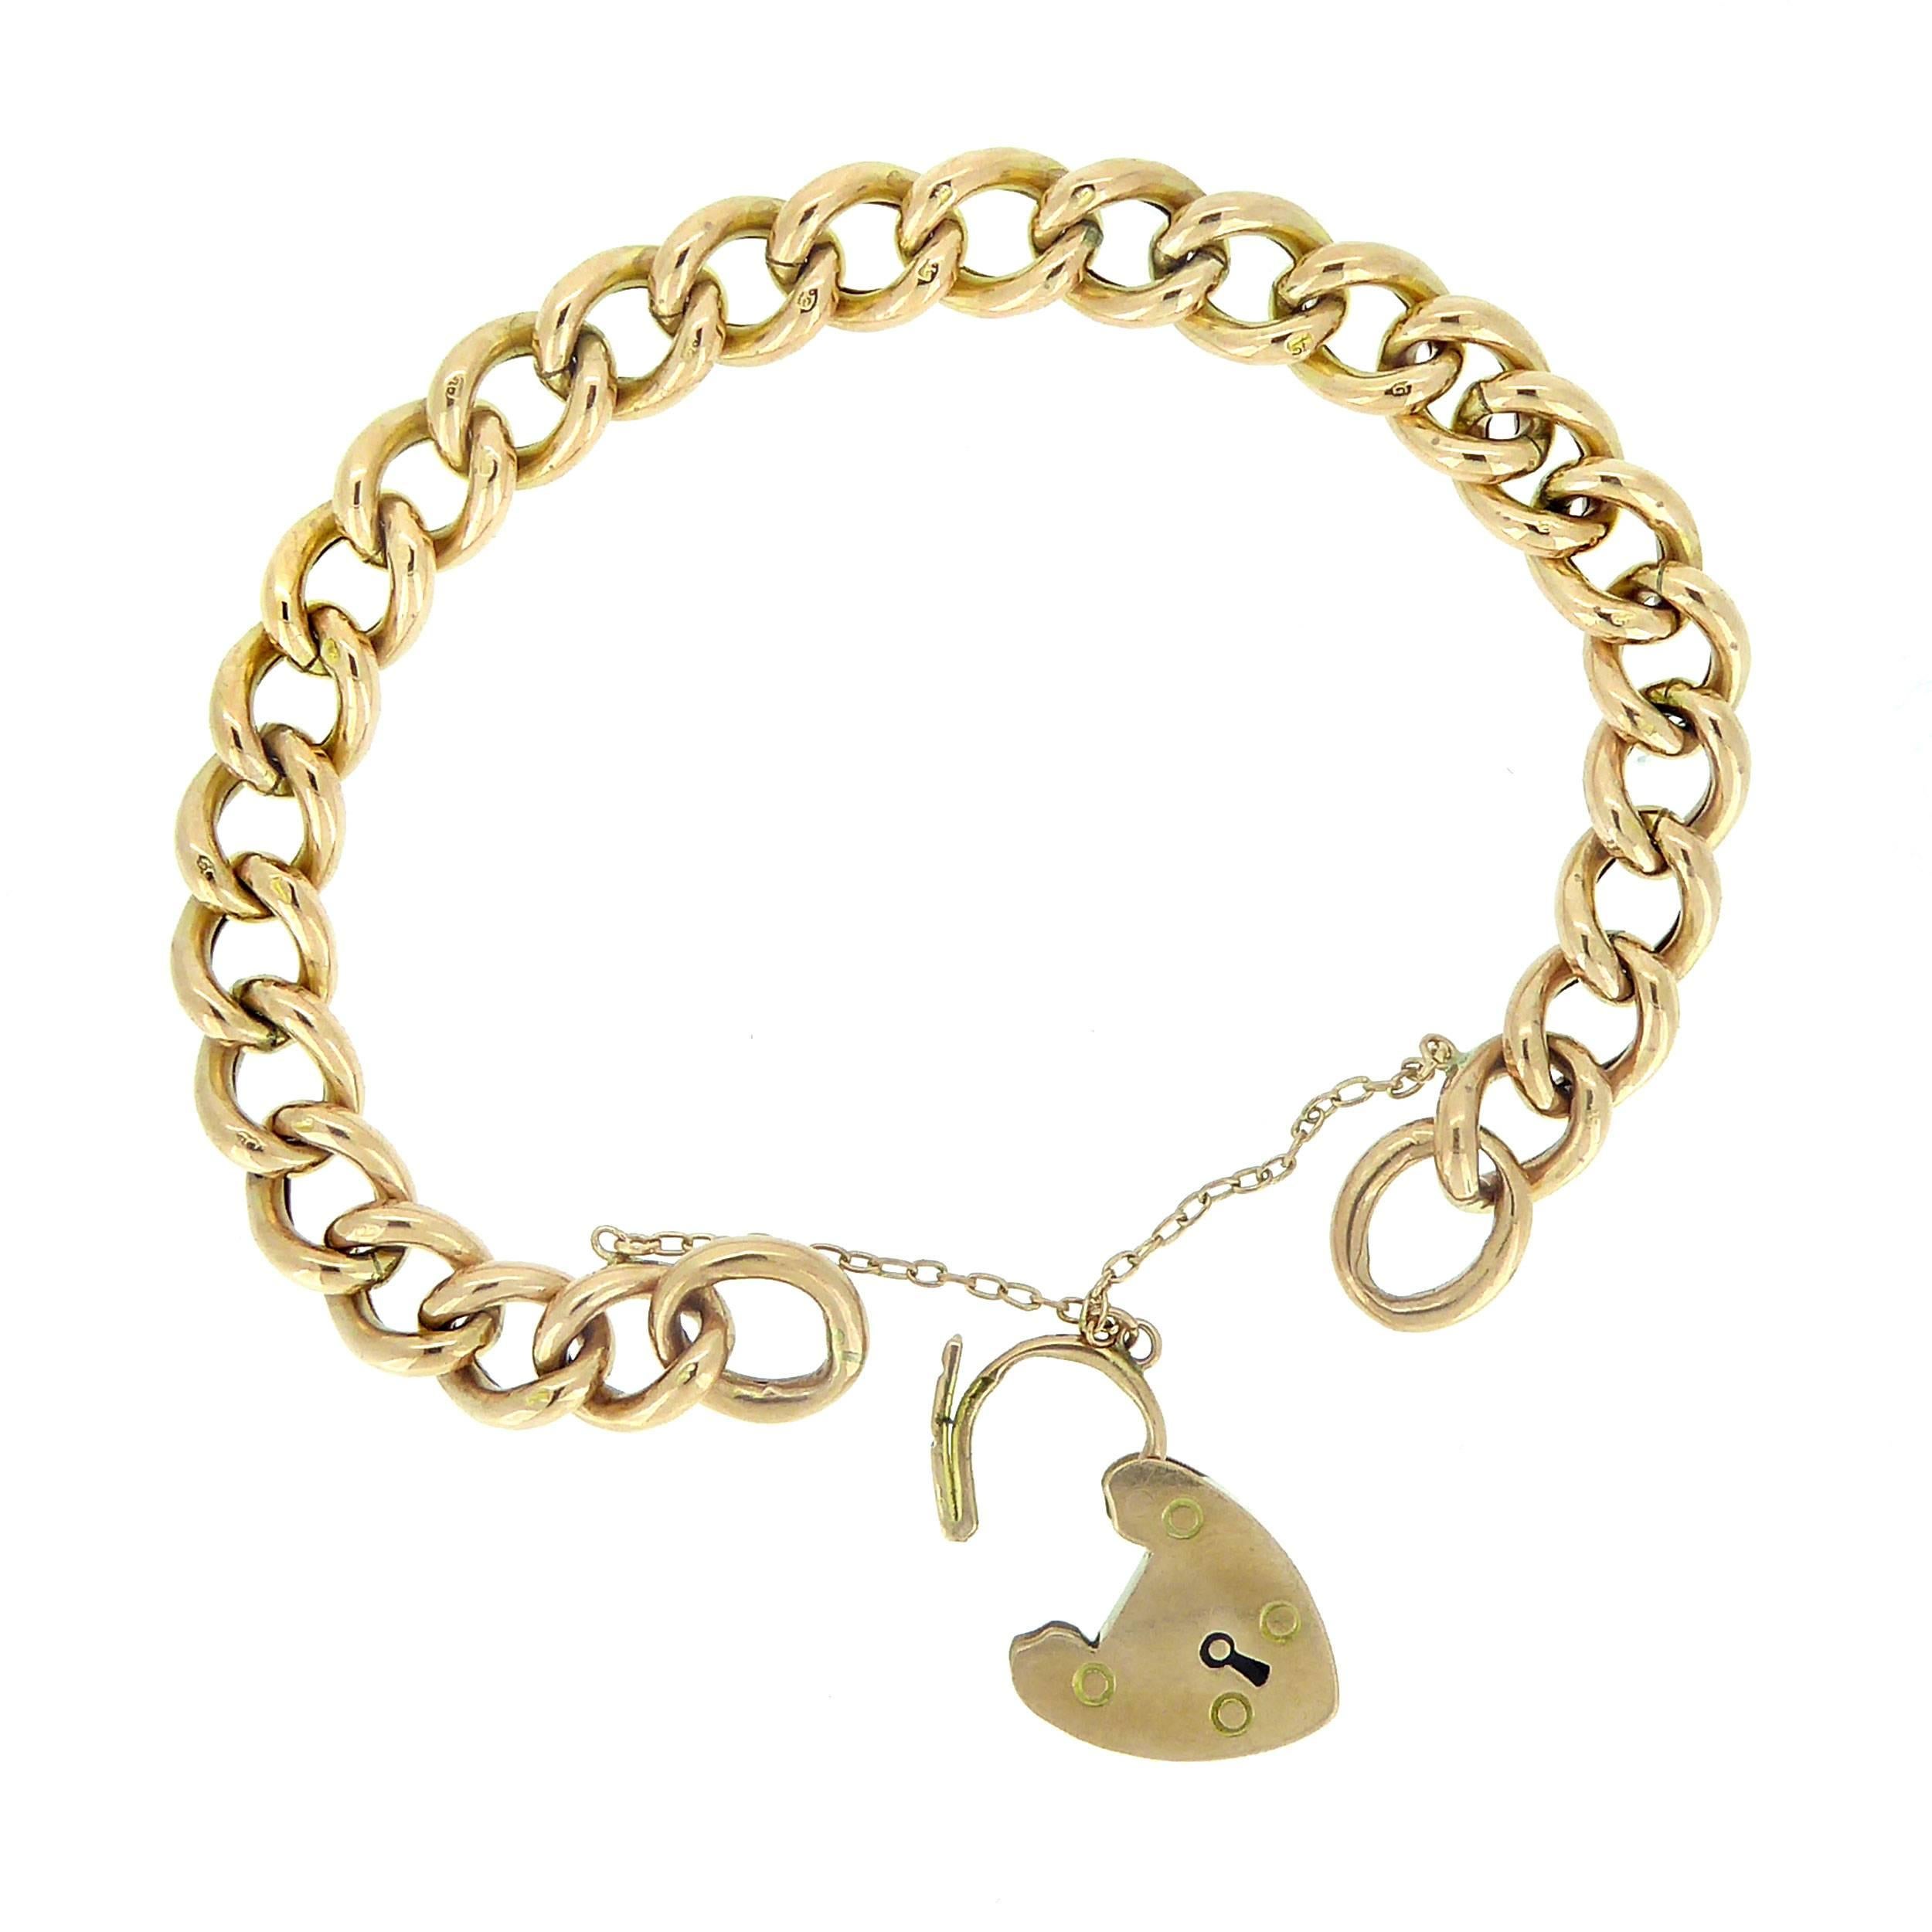 Women's or Men's 1900s Gold Curb Link Bracelet with Padlock and Safety Chain